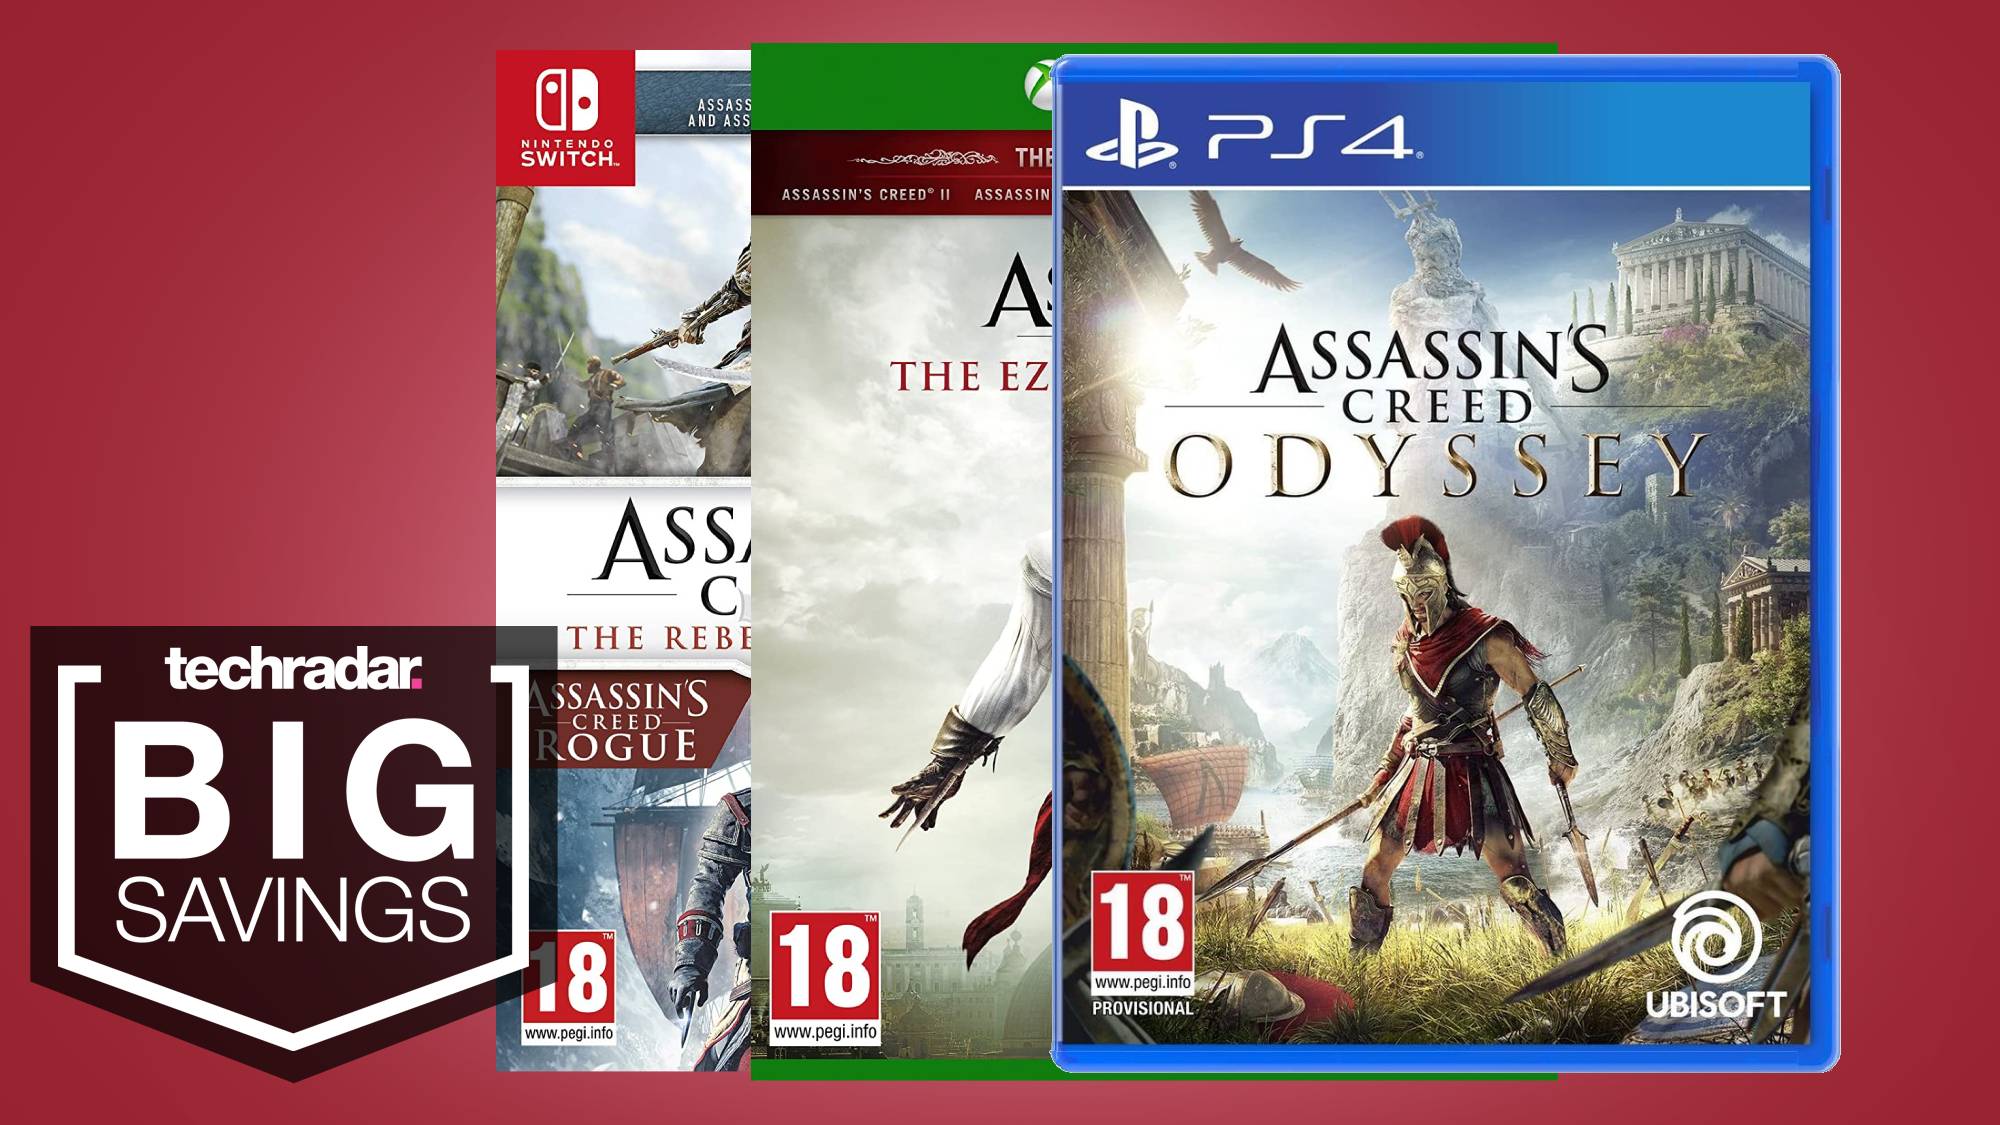 Assassin's Creed: The Ezio Collection - Xbox One (digital) : Target